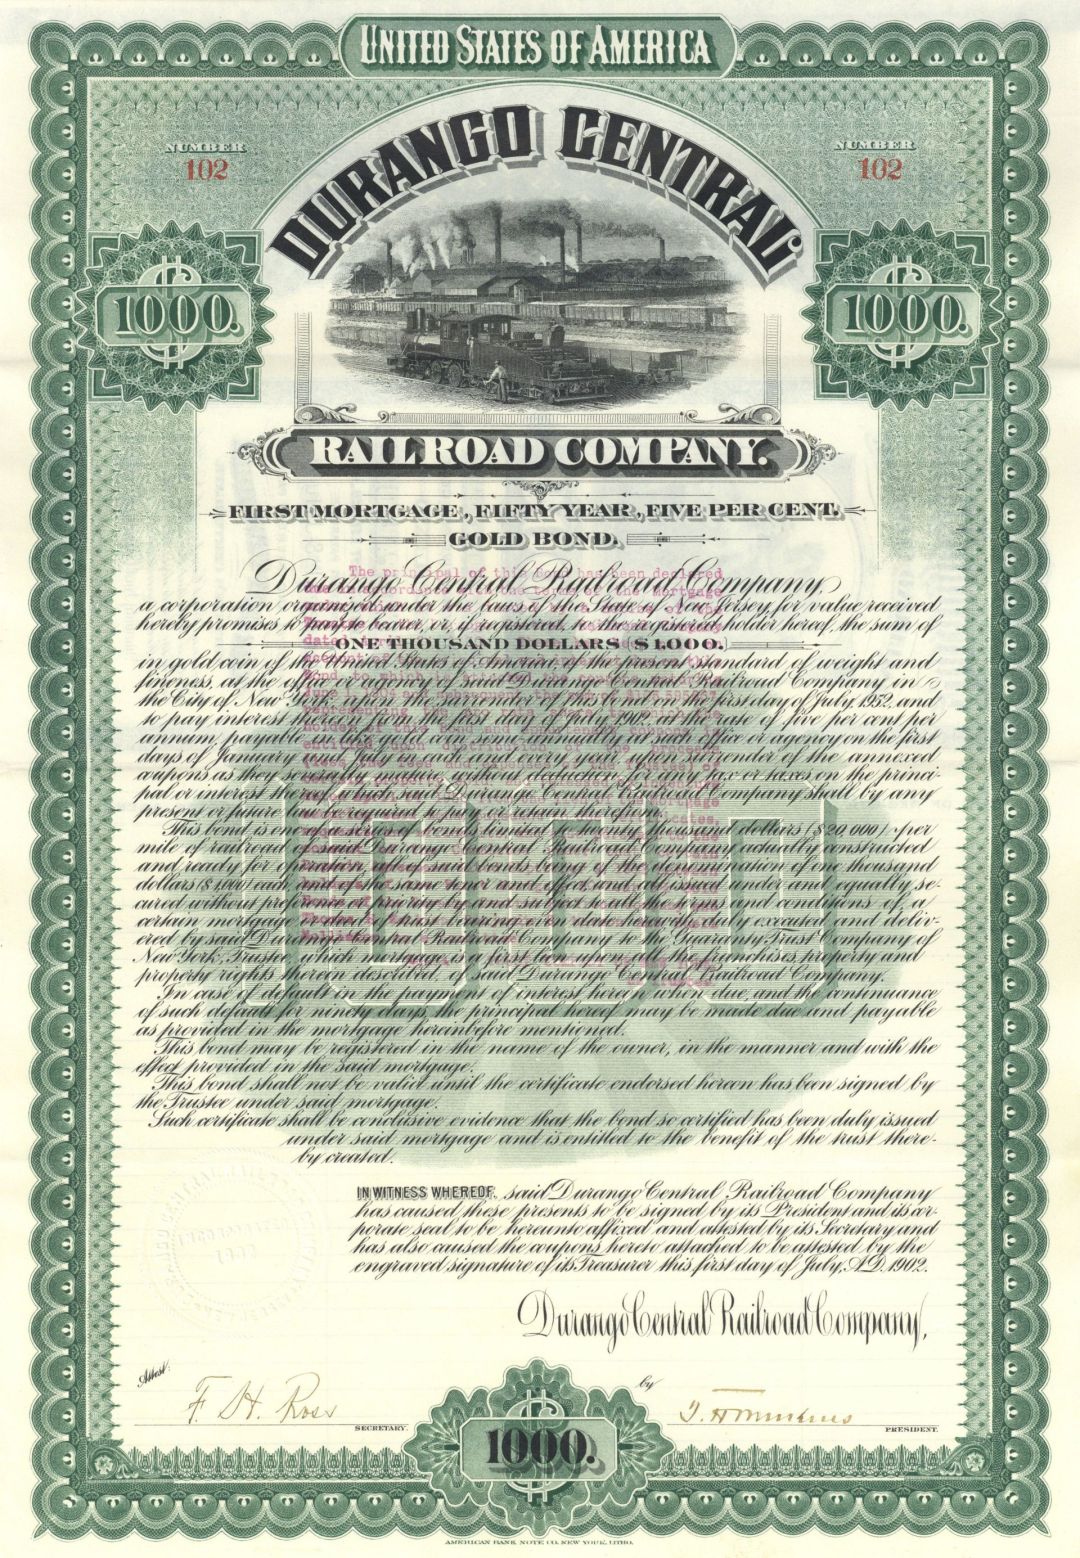 Durango Central Railroad Co. - dated 1902 $1,000 50 Year 5% Mexico Uncanceled Gold Bond with almost 2 Full Pages of Coupons